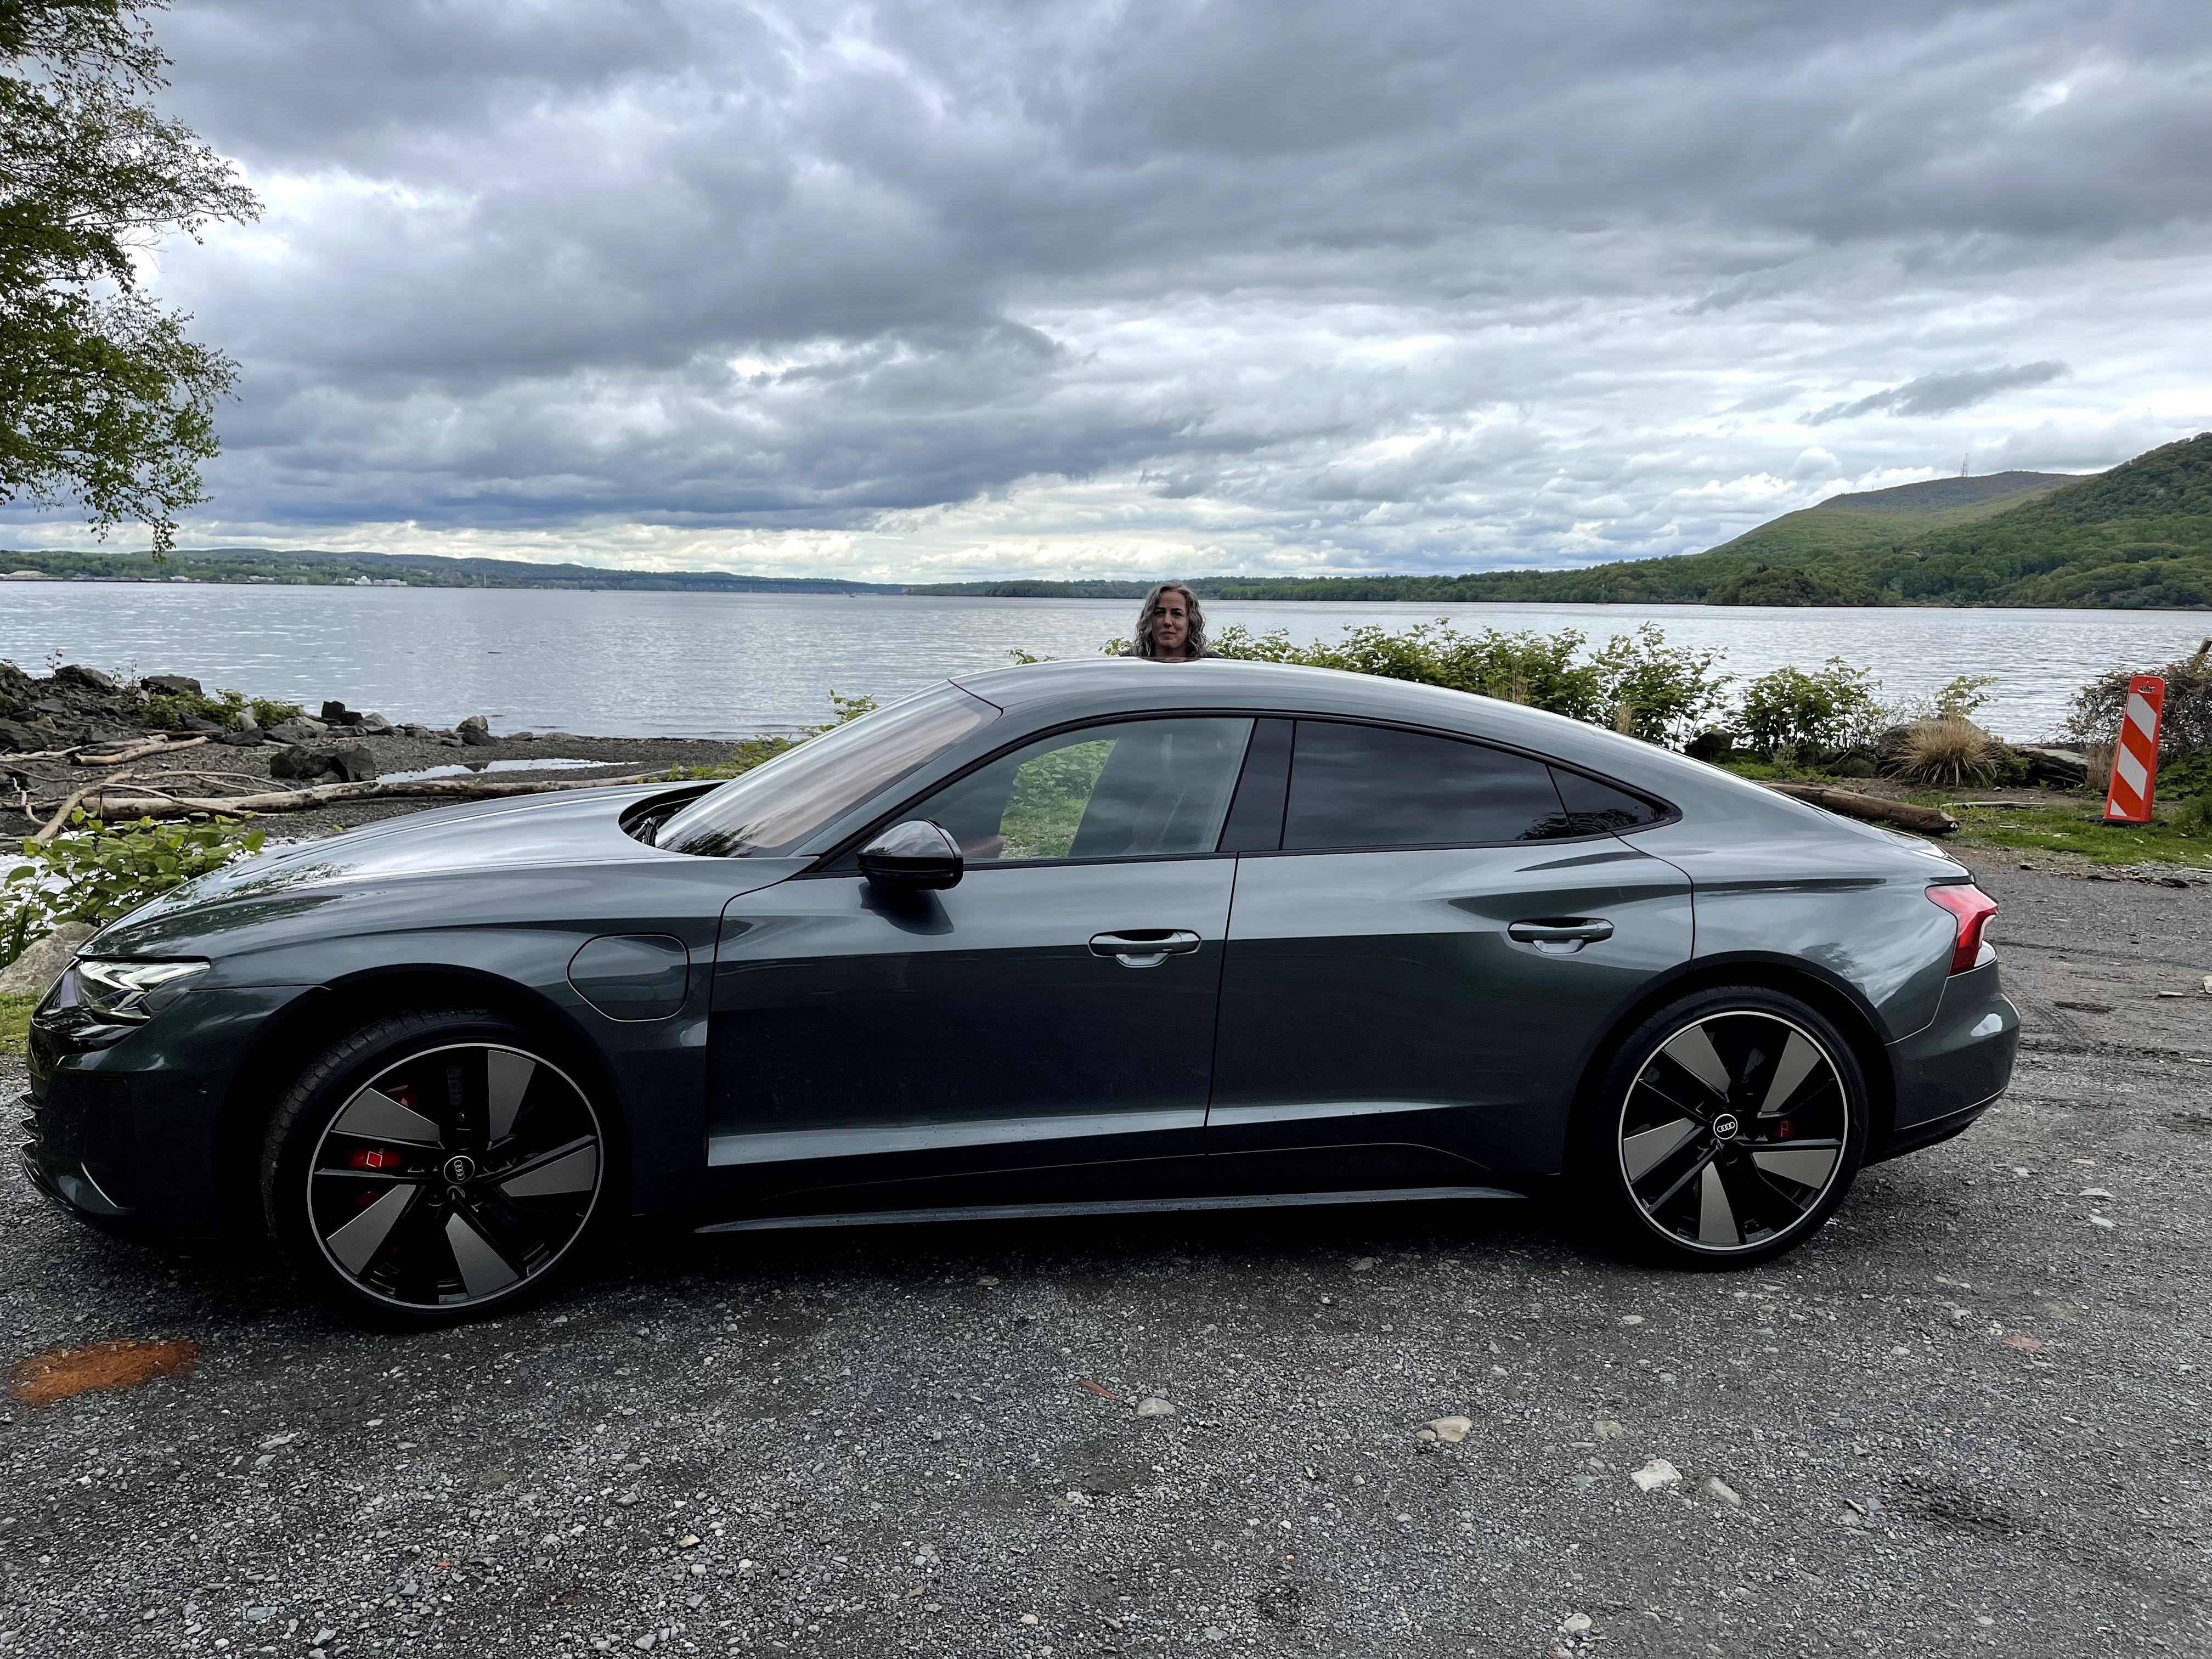 Rs Gt Audi Price Review